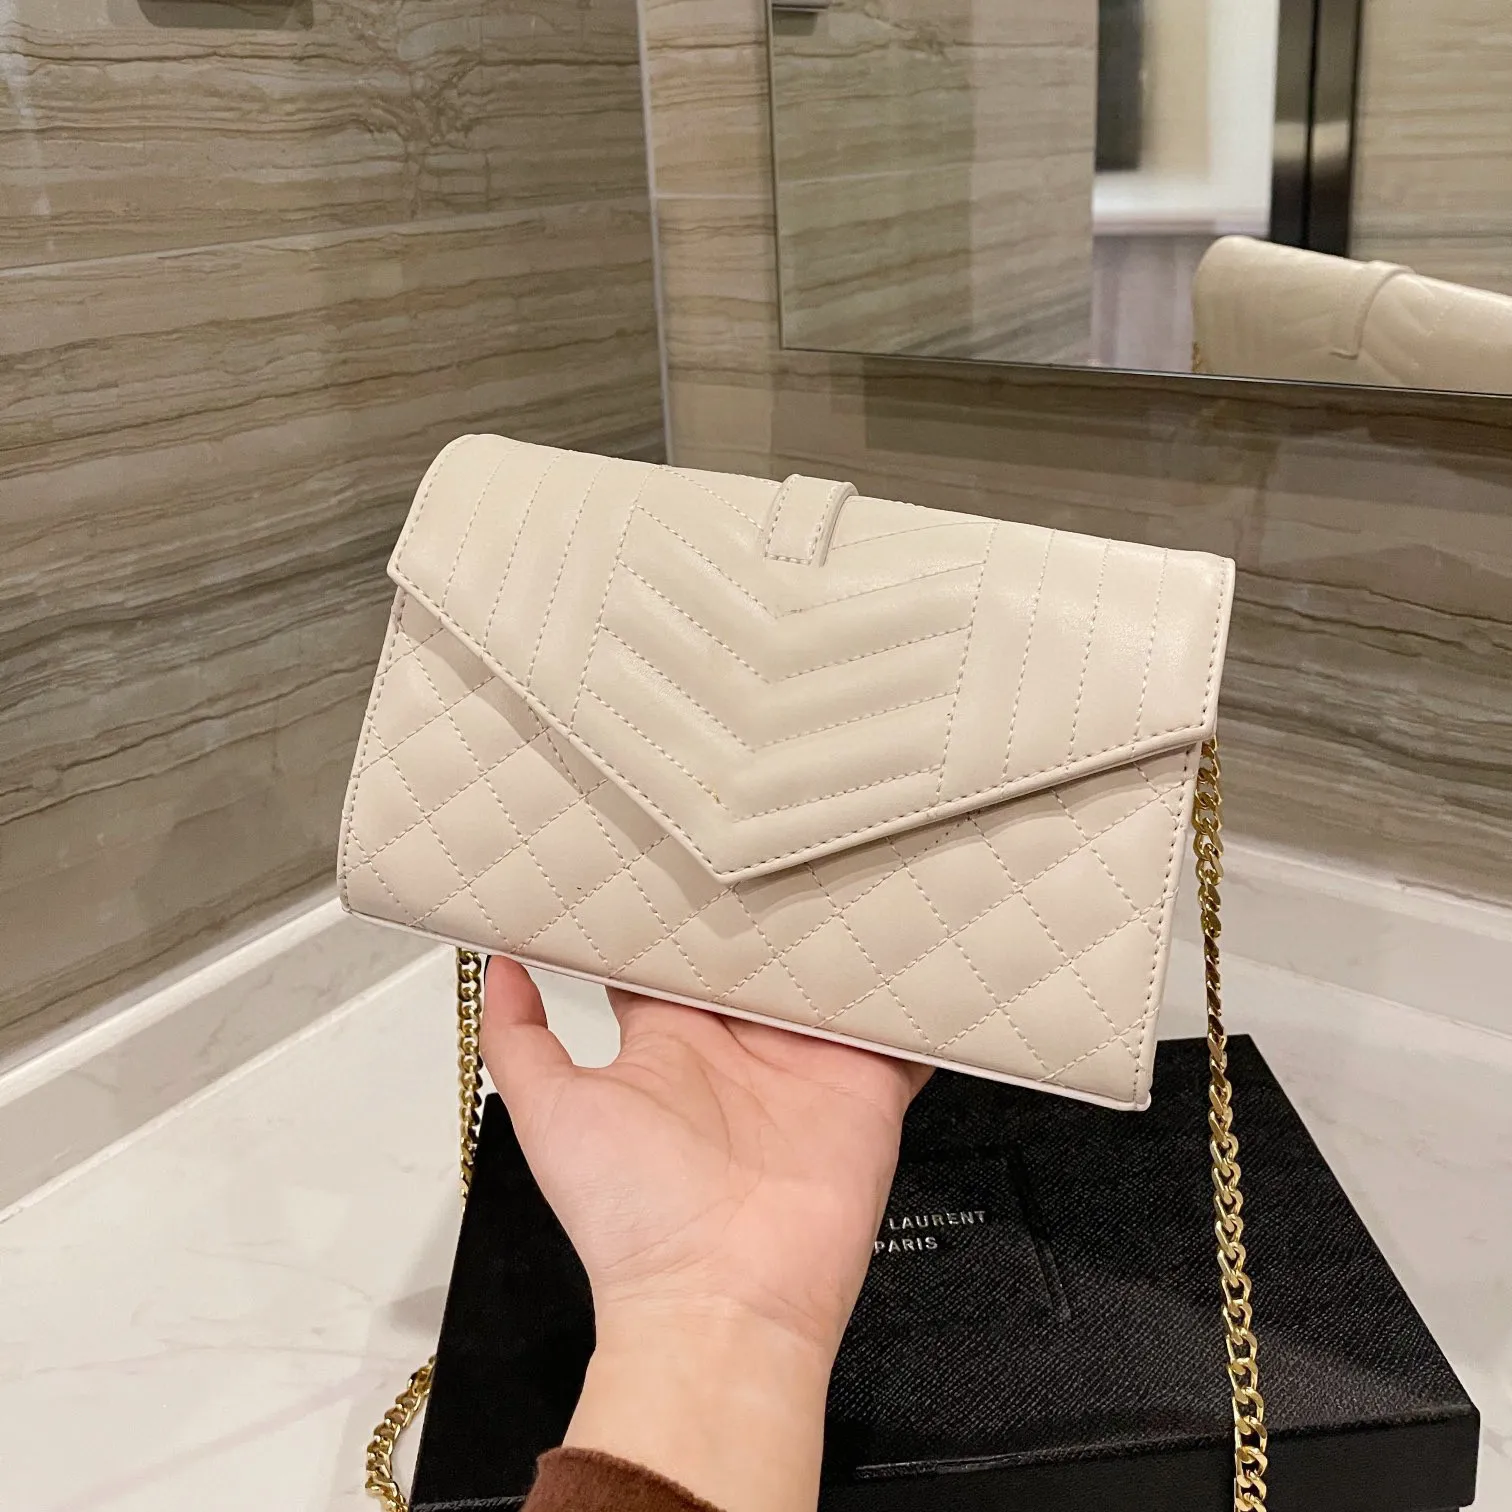 

wholesale Black Ivory Genuine Leather Envelope Thread Flap Square Chain One Side Shoulder Bag Handbags Cross body bags for woman